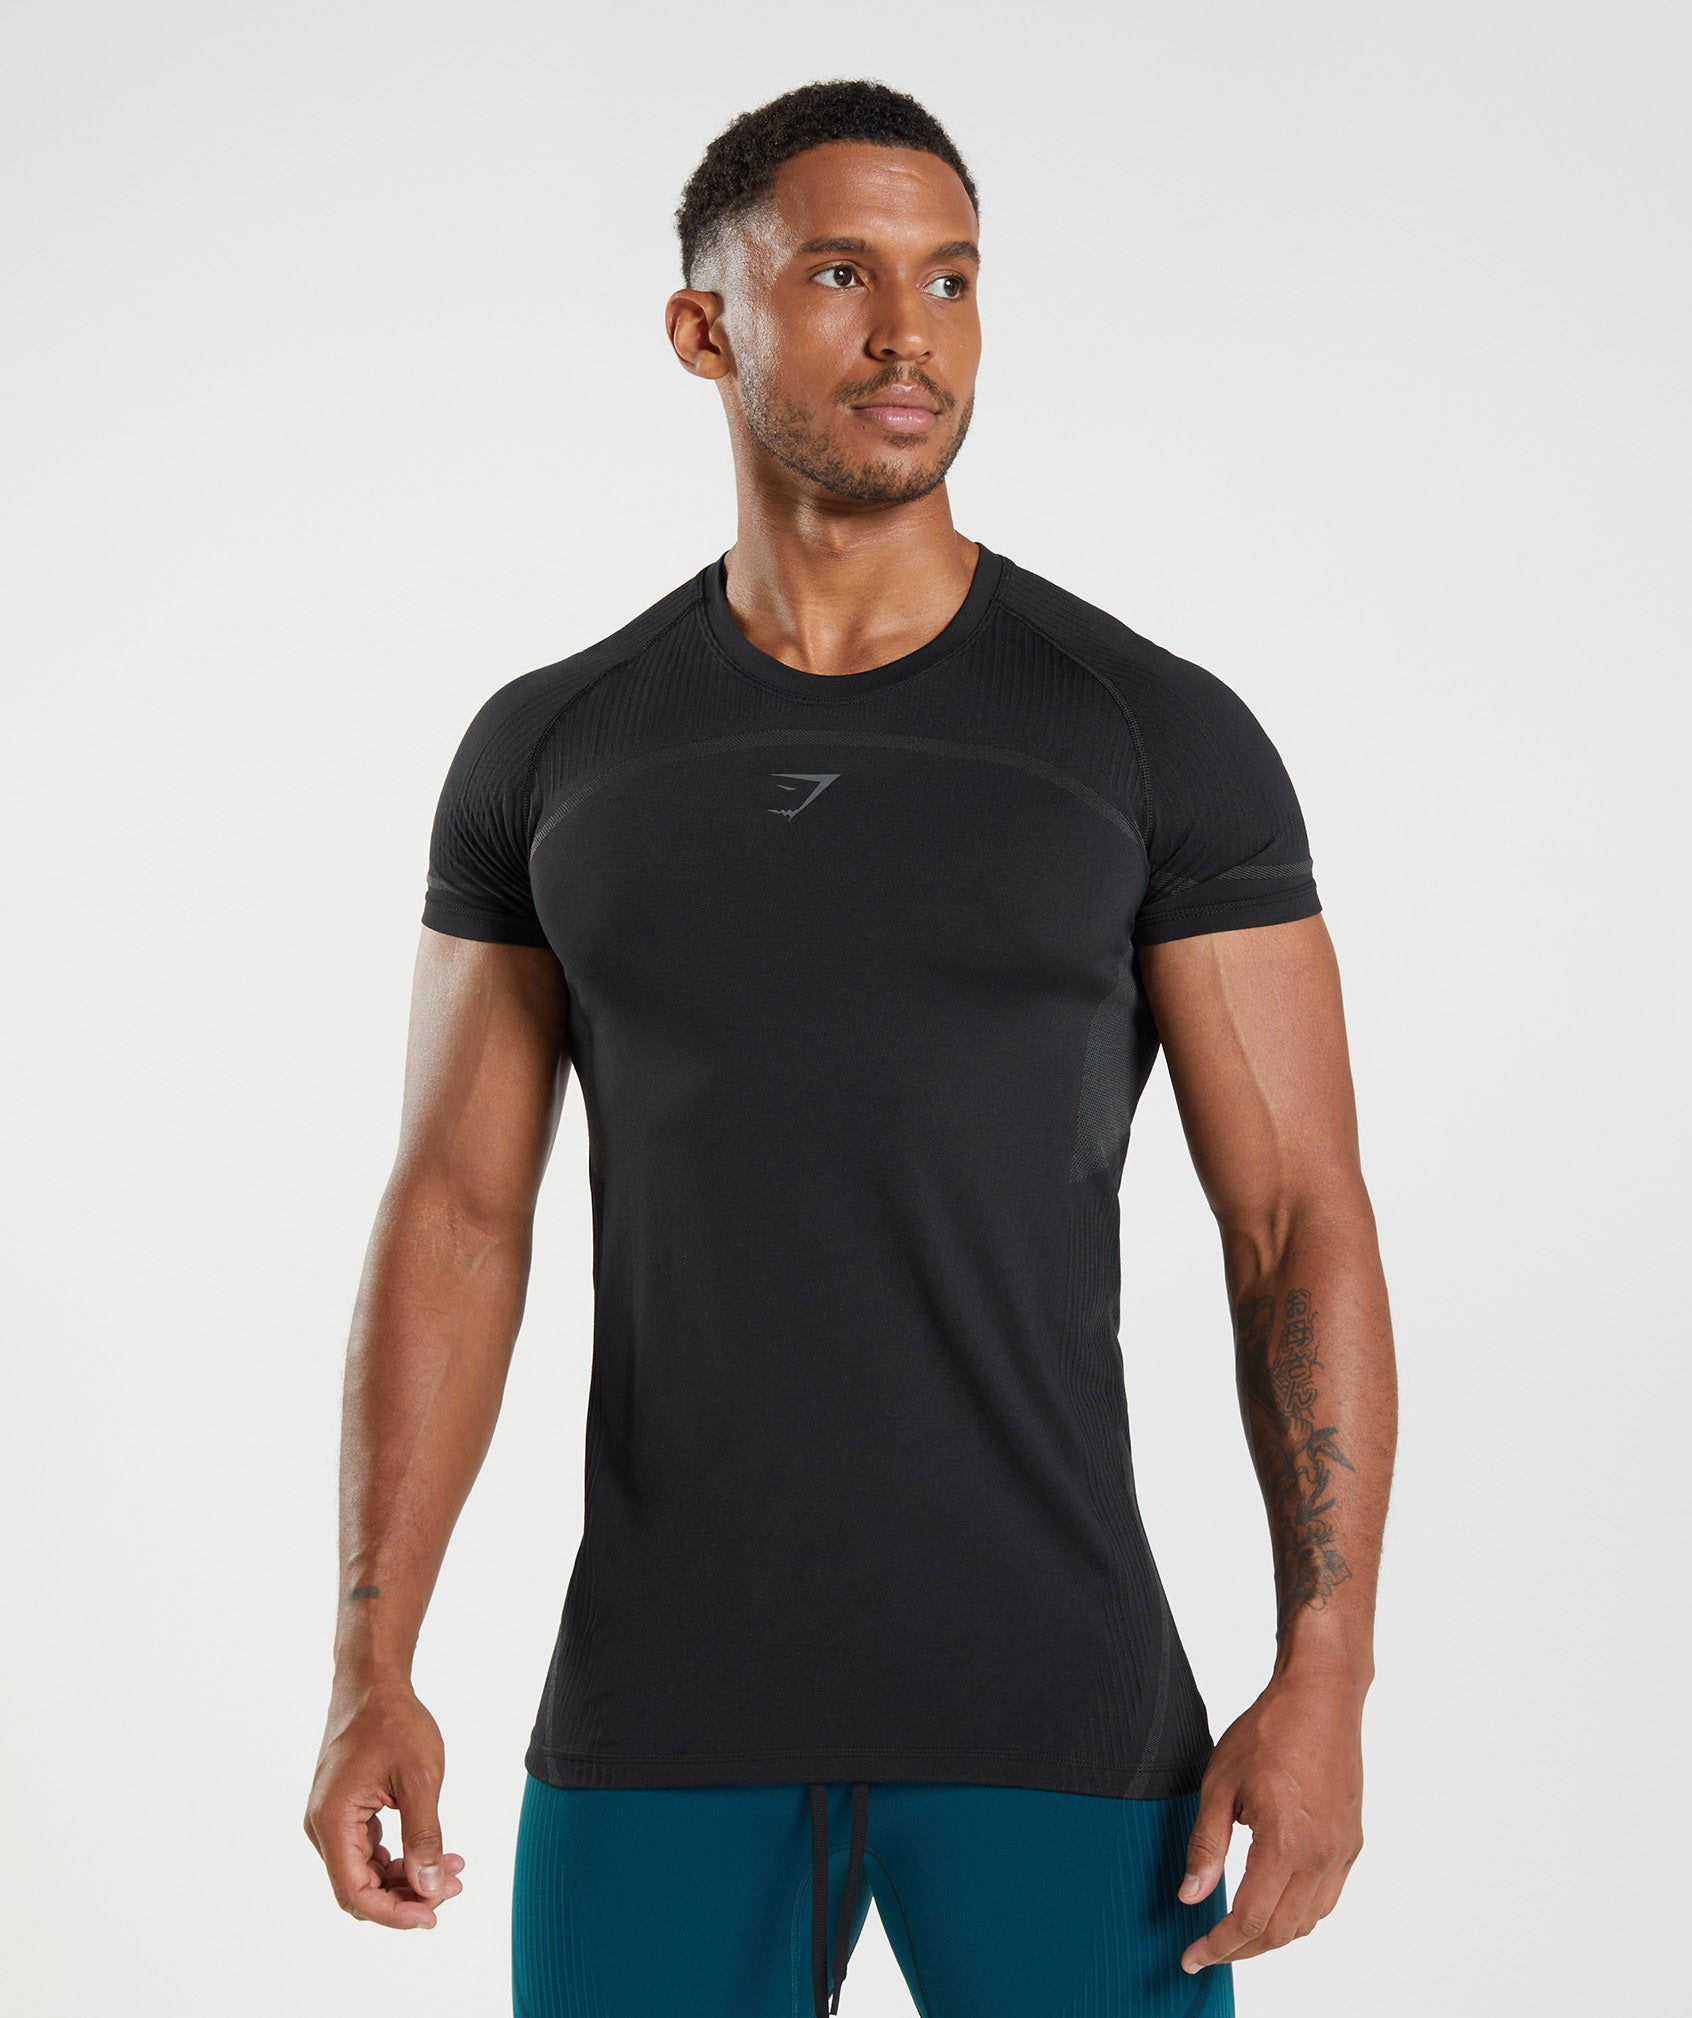 315 Seamless T-Shirt in Black - view 1